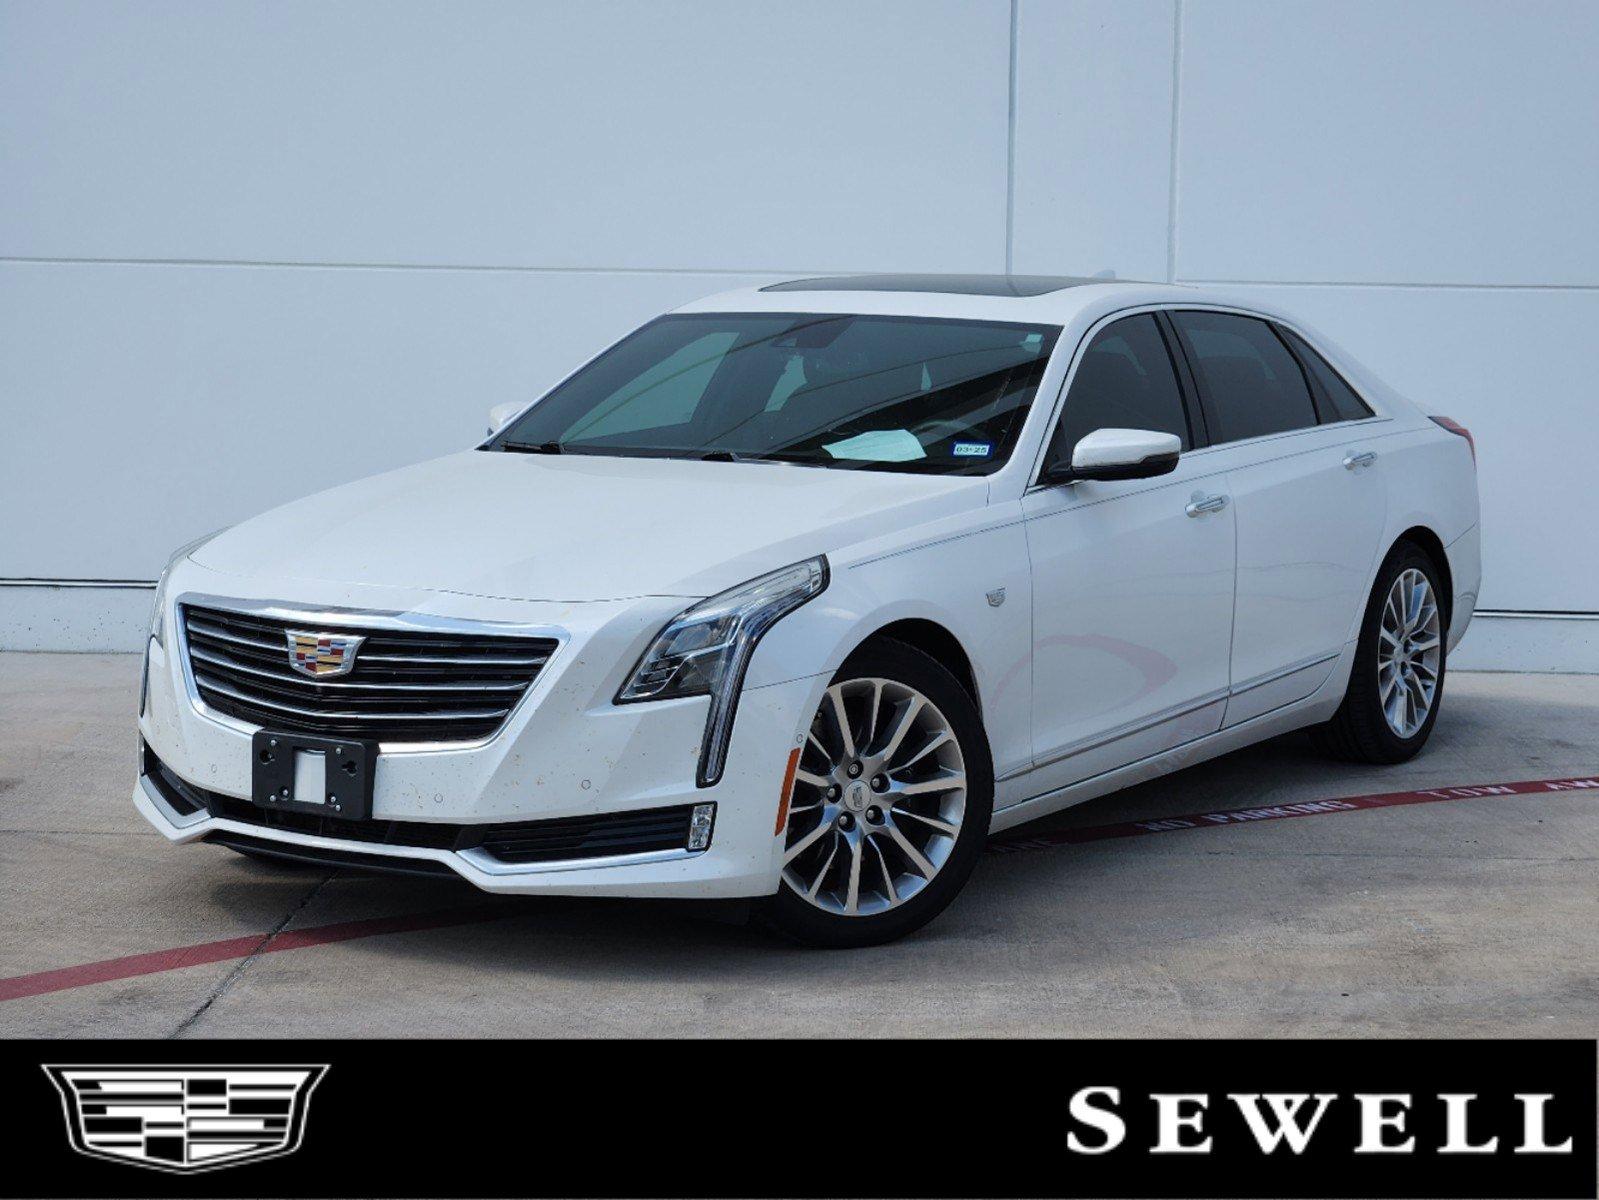 2017 Cadillac CT6 Vehicle Photo in GRAPEVINE, TX 76051-8302